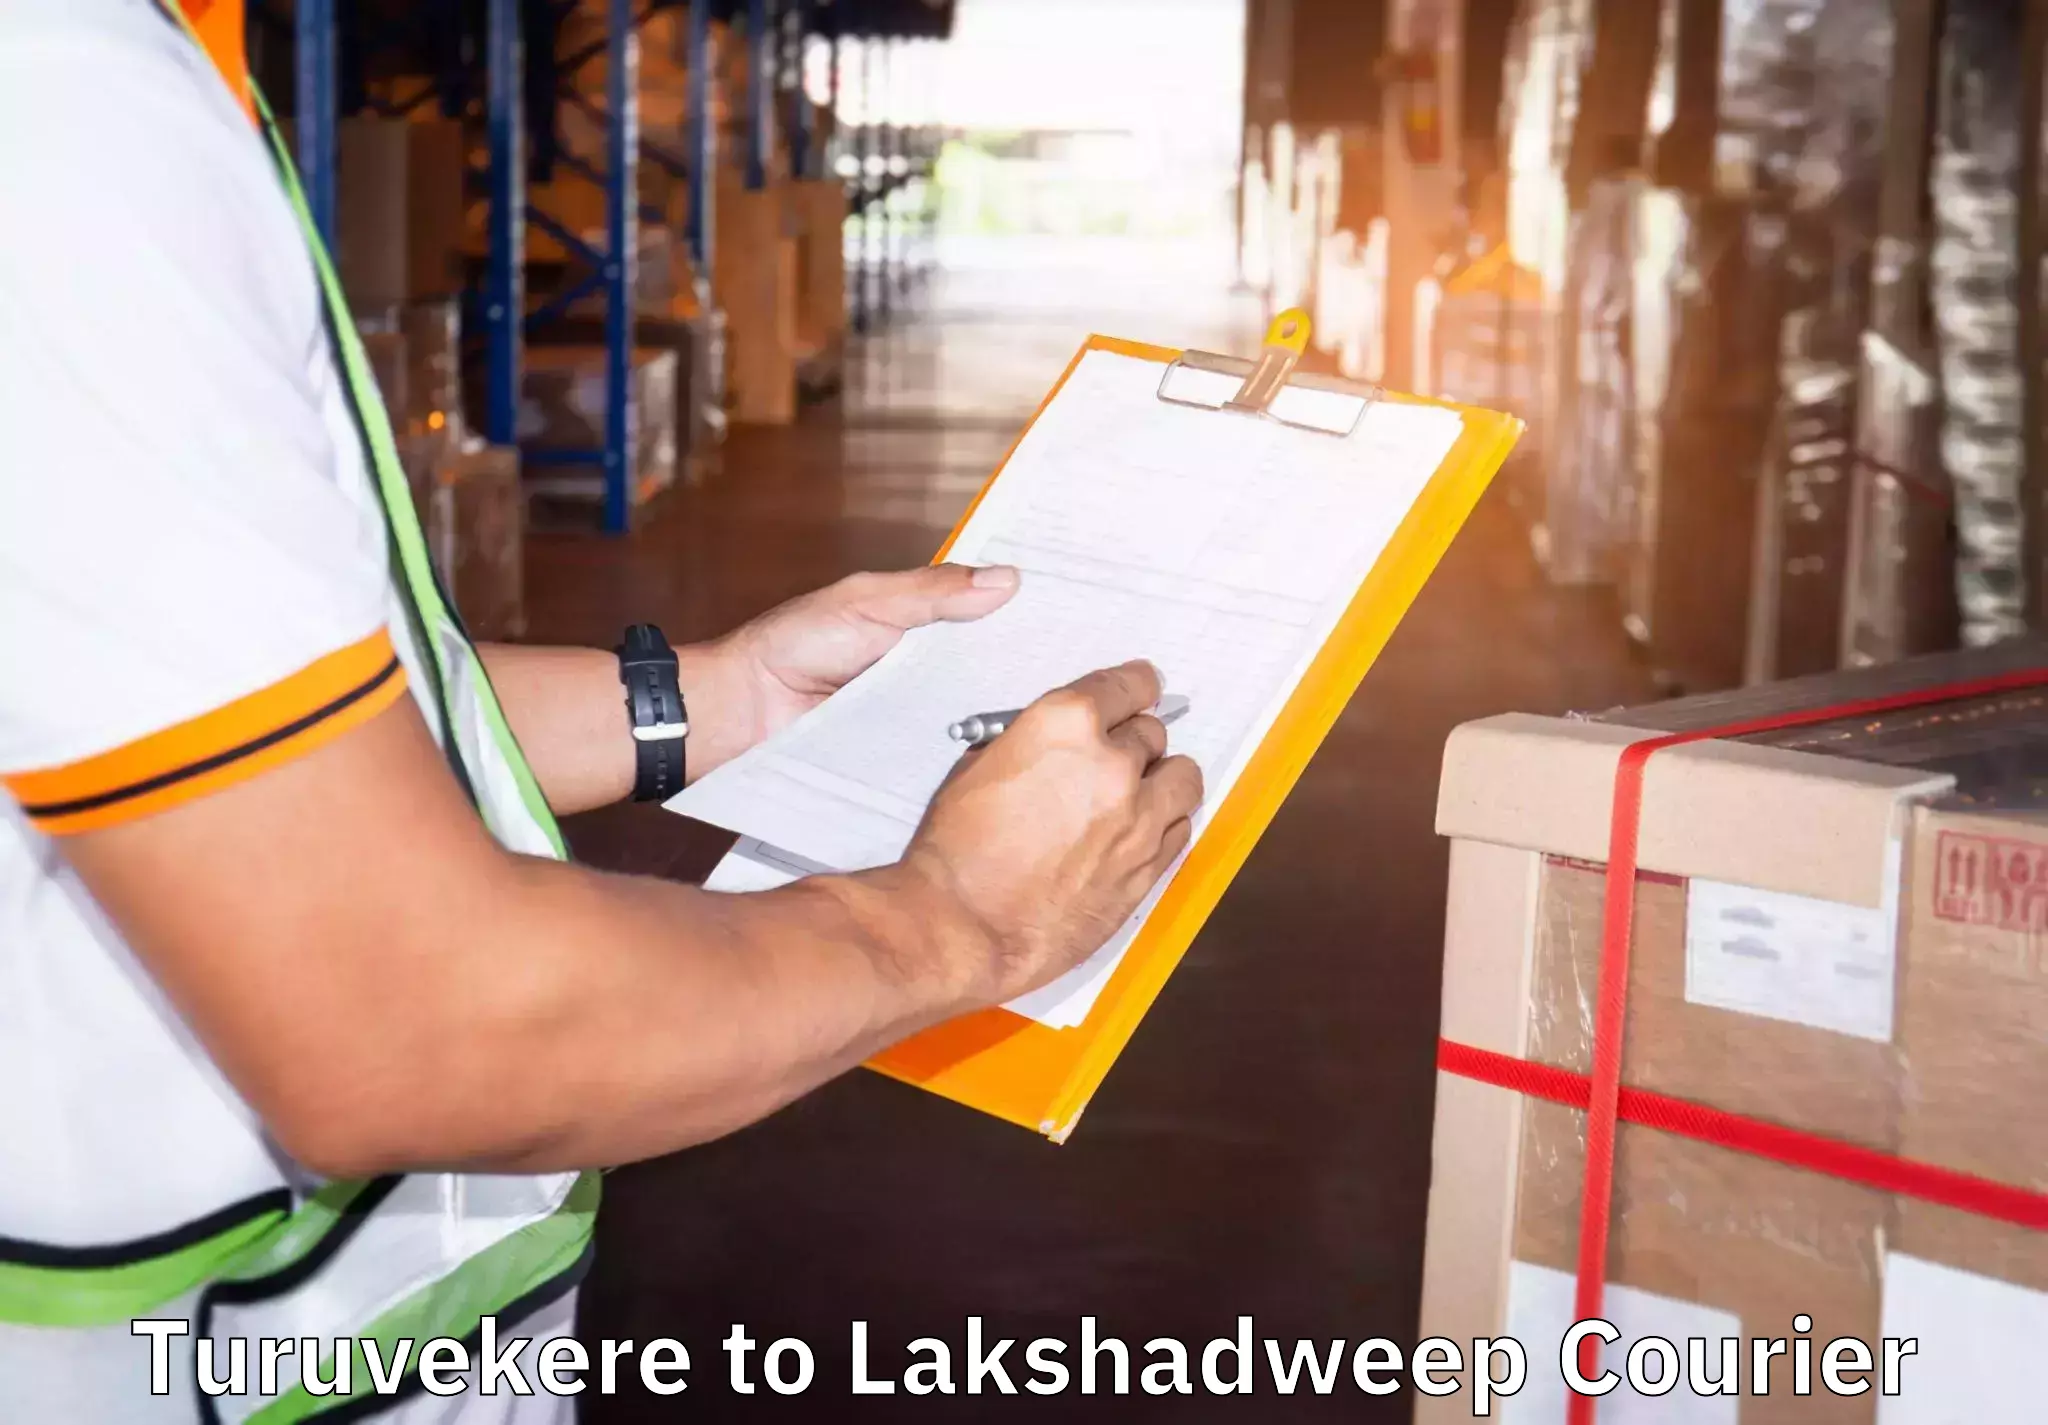 Moving service excellence Turuvekere to Lakshadweep